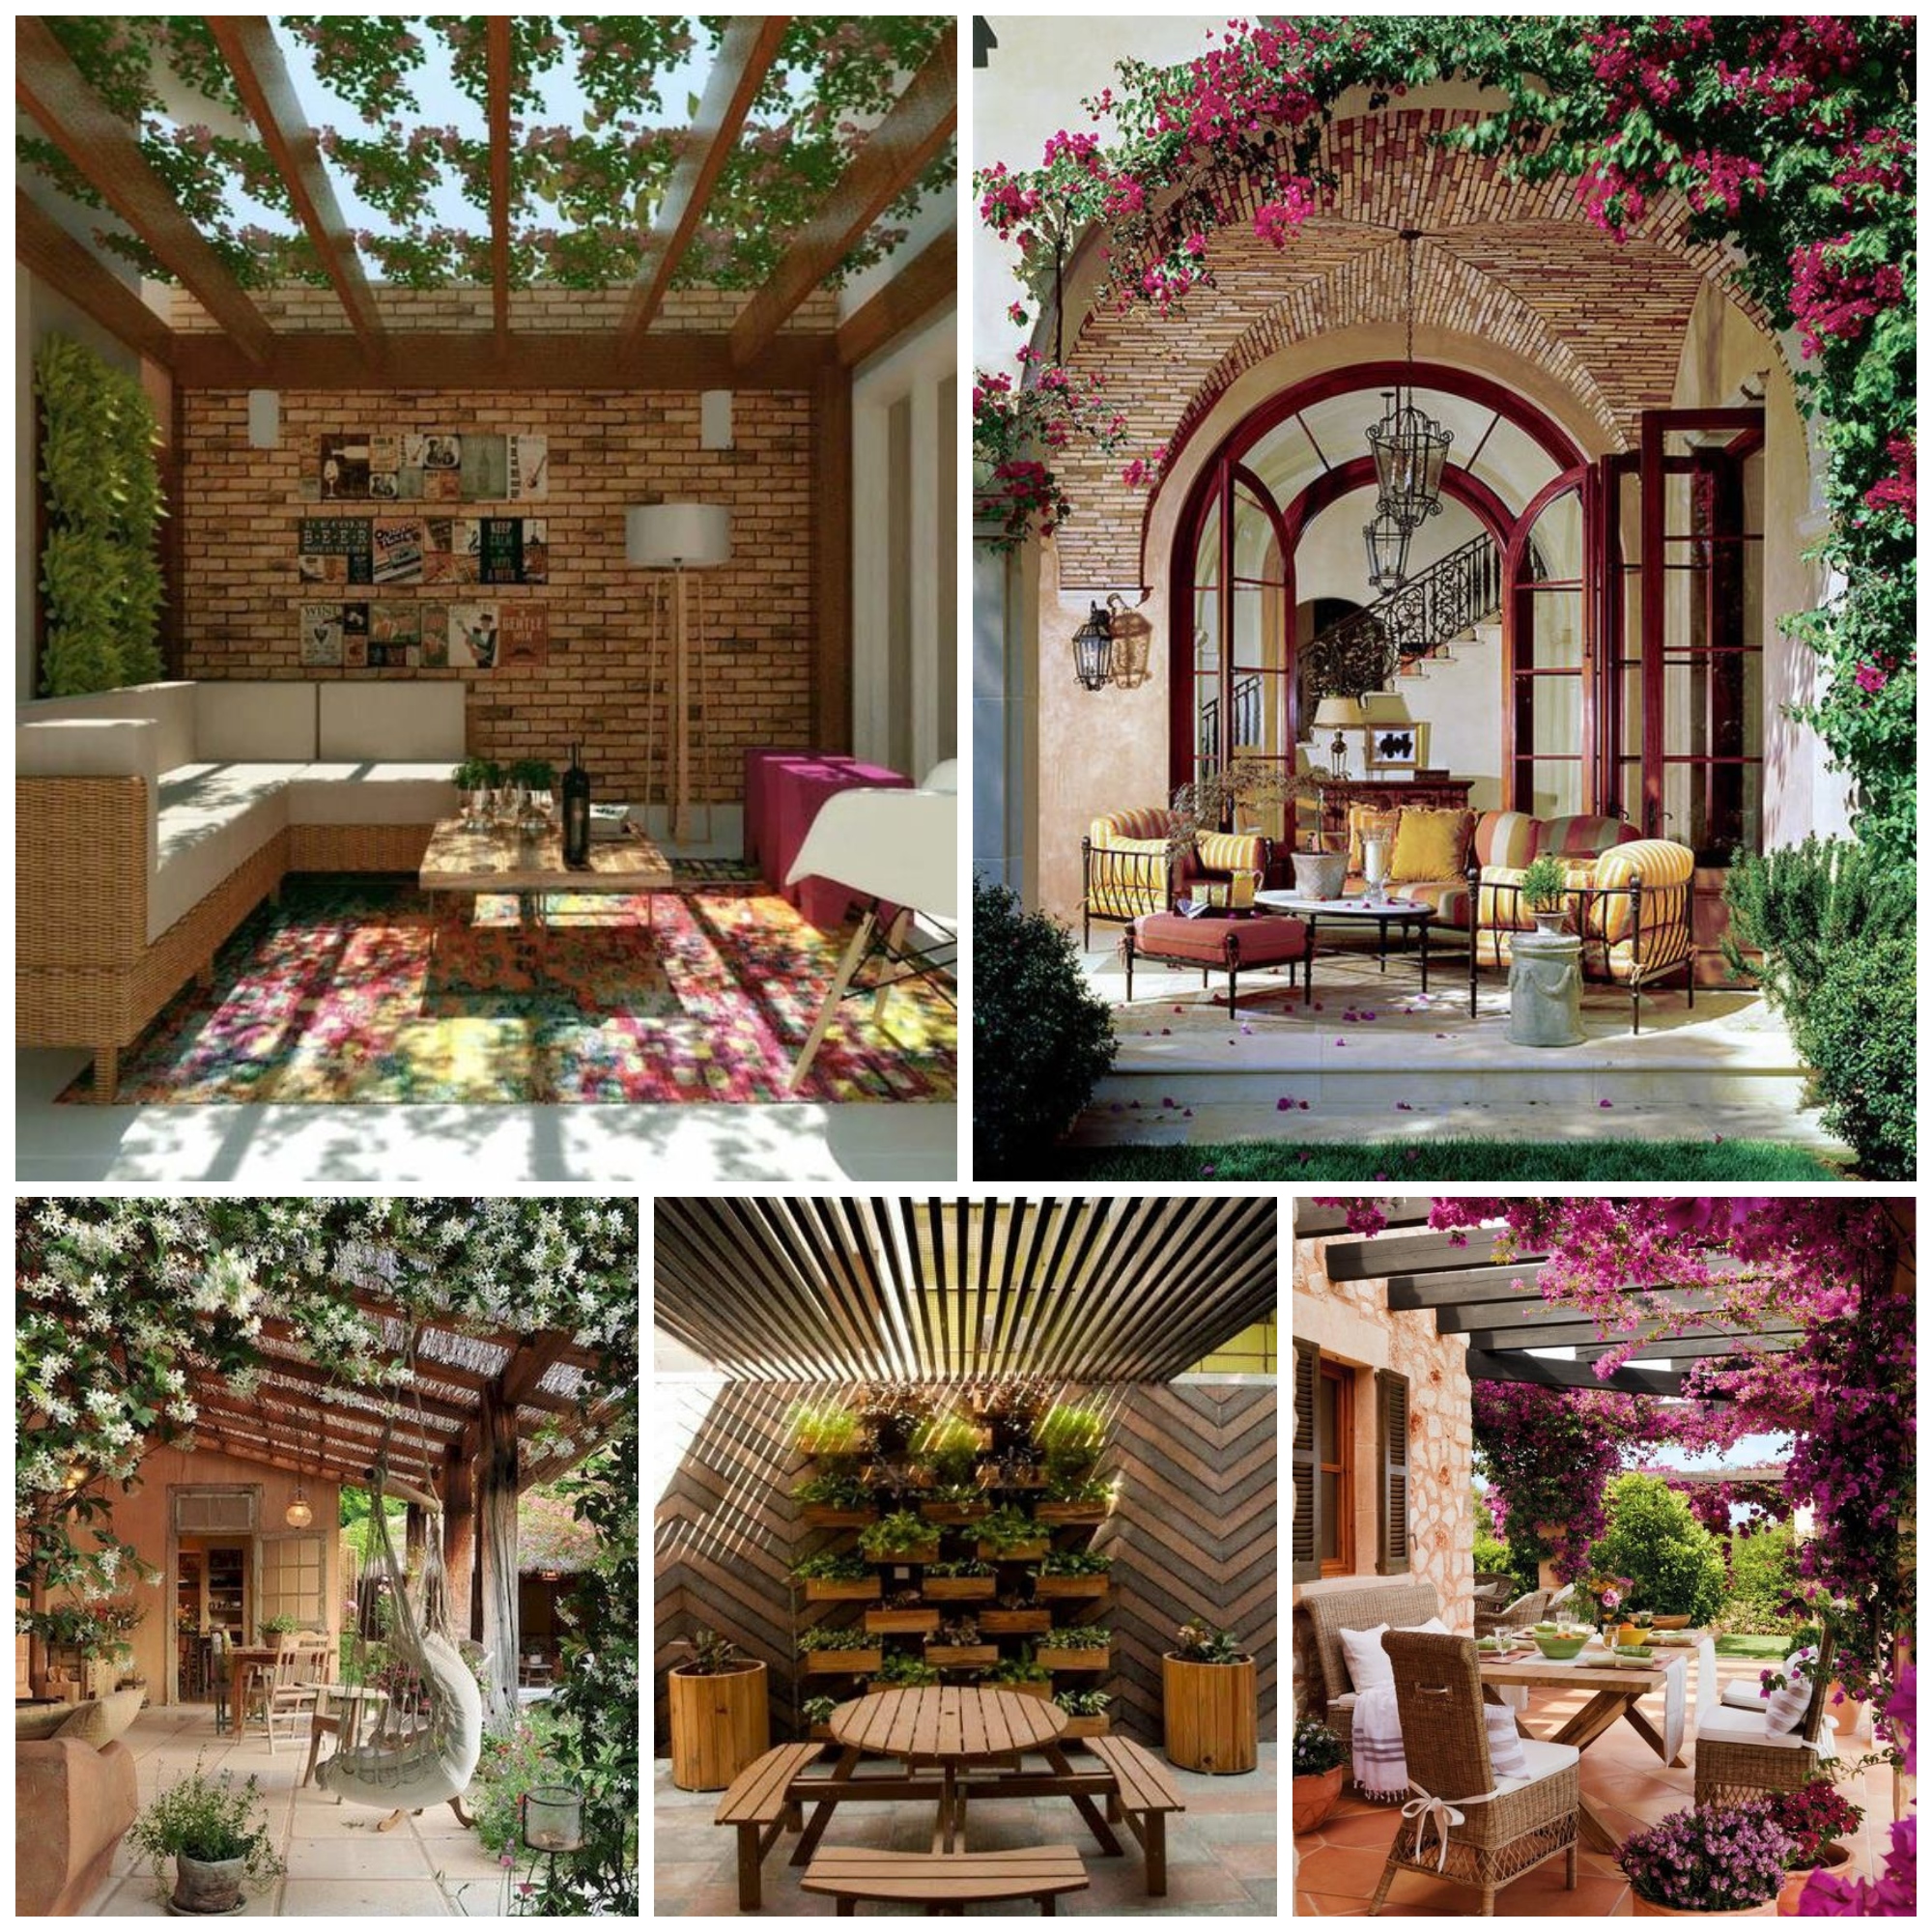 Pergola ideas – gorgeous garden structures to add style and shade